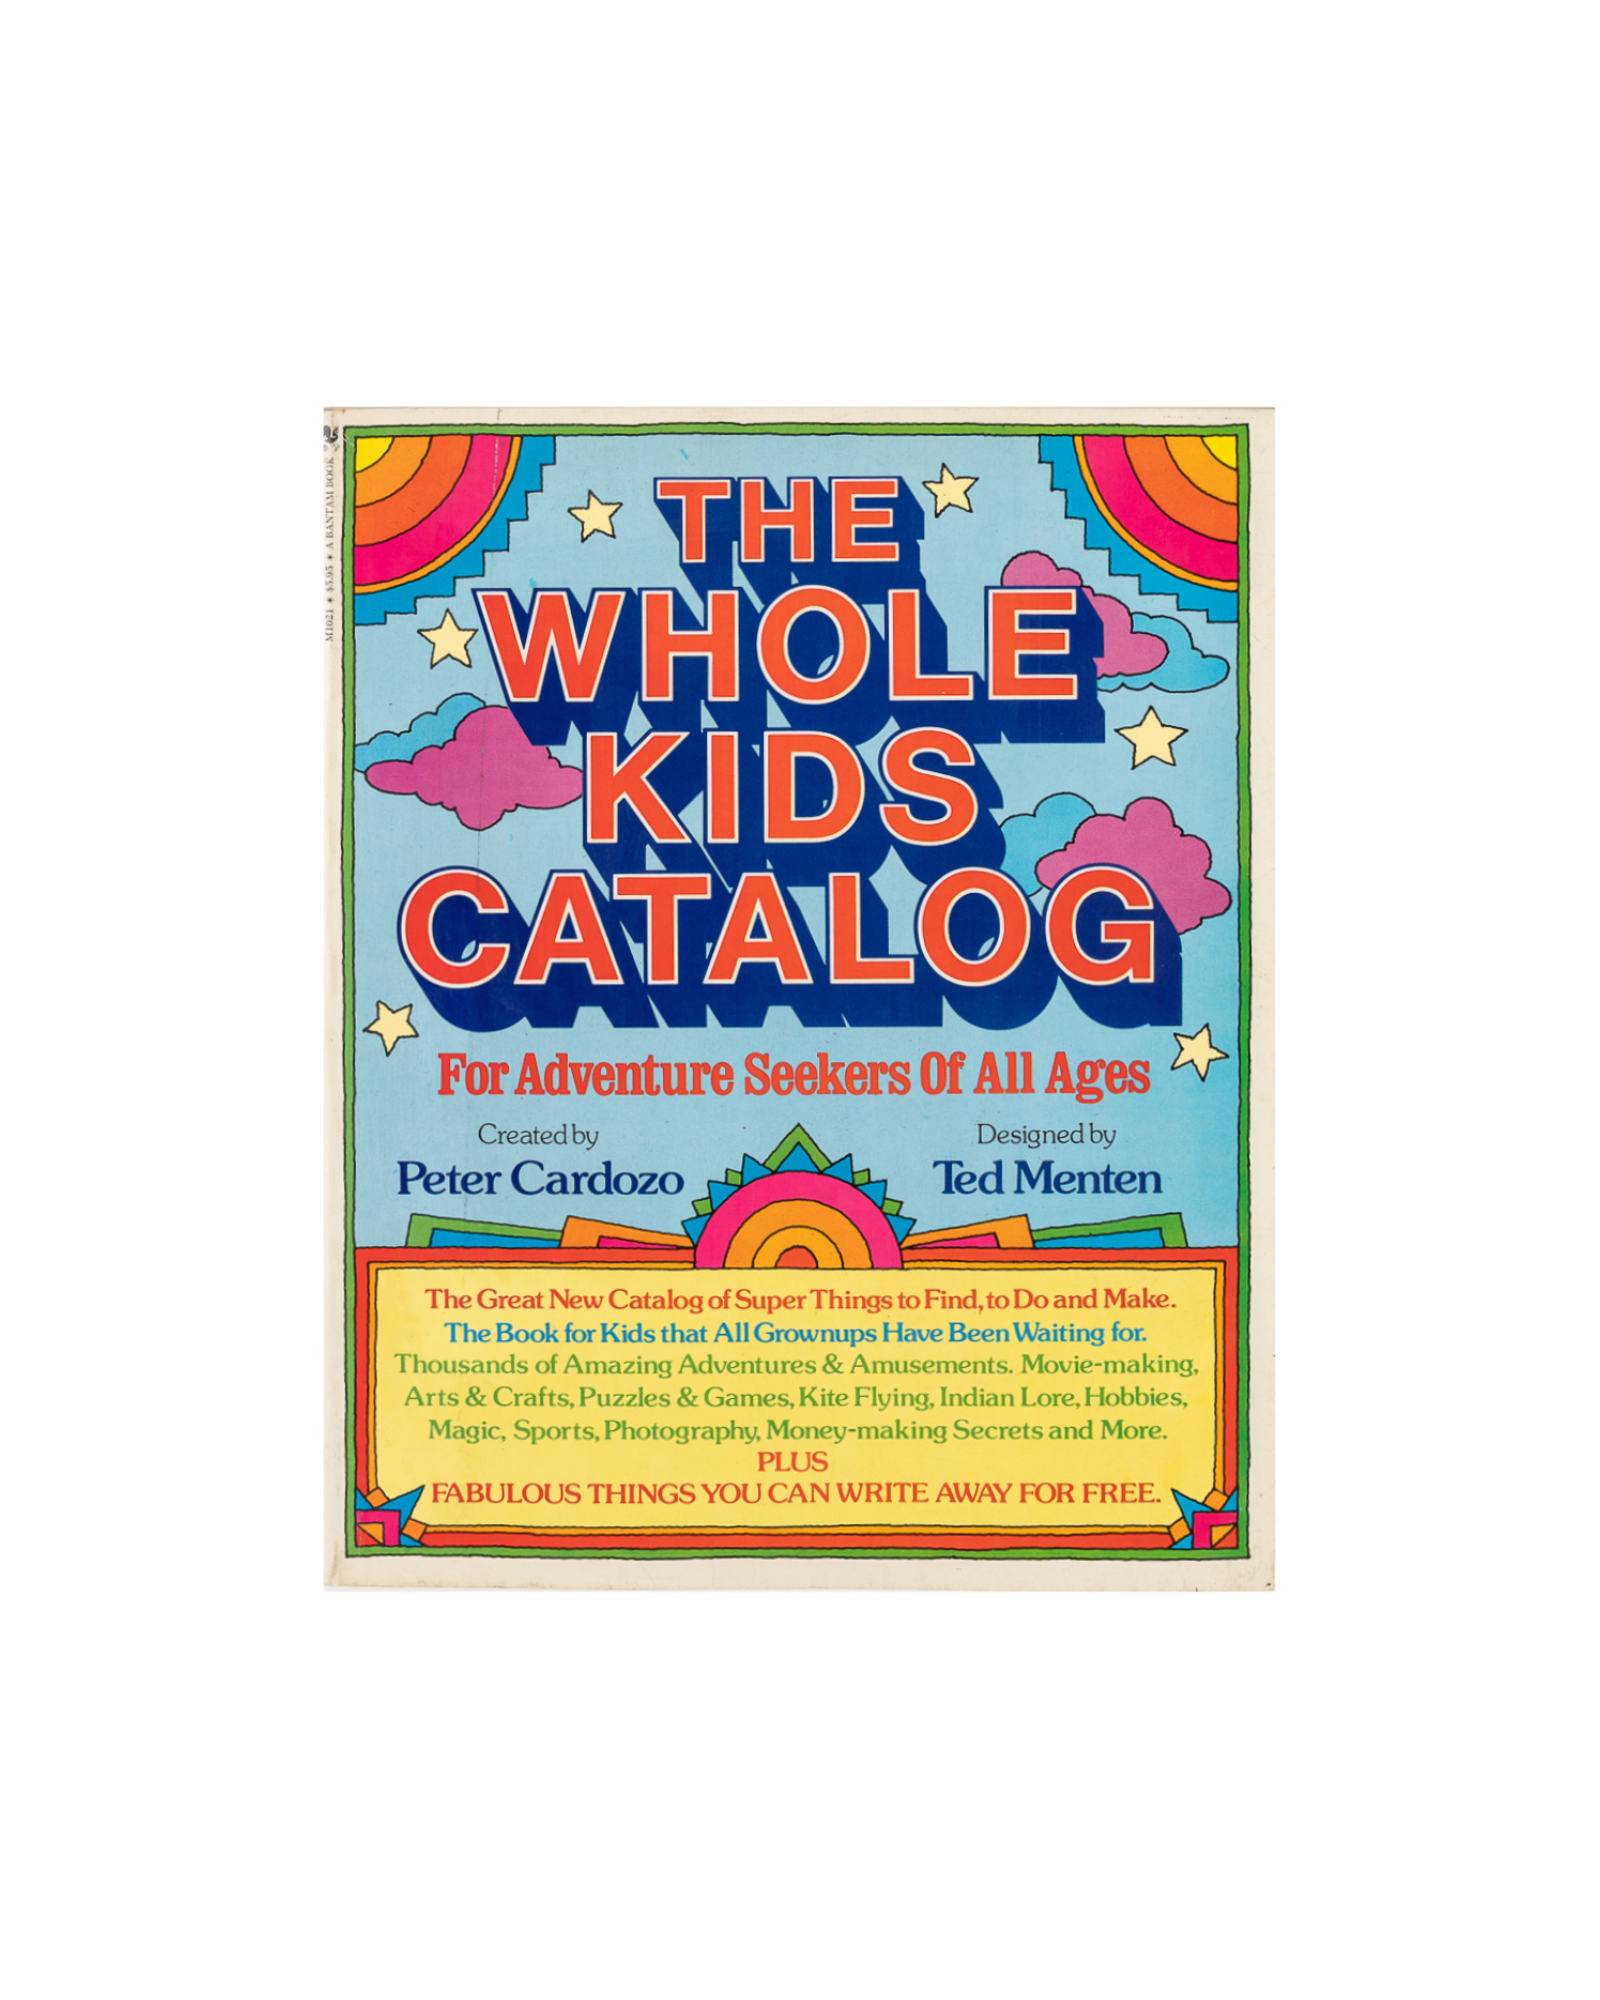 Classic Paris - Book - Peter Cardozo and Ted Menten - The Whole Kids Catalog